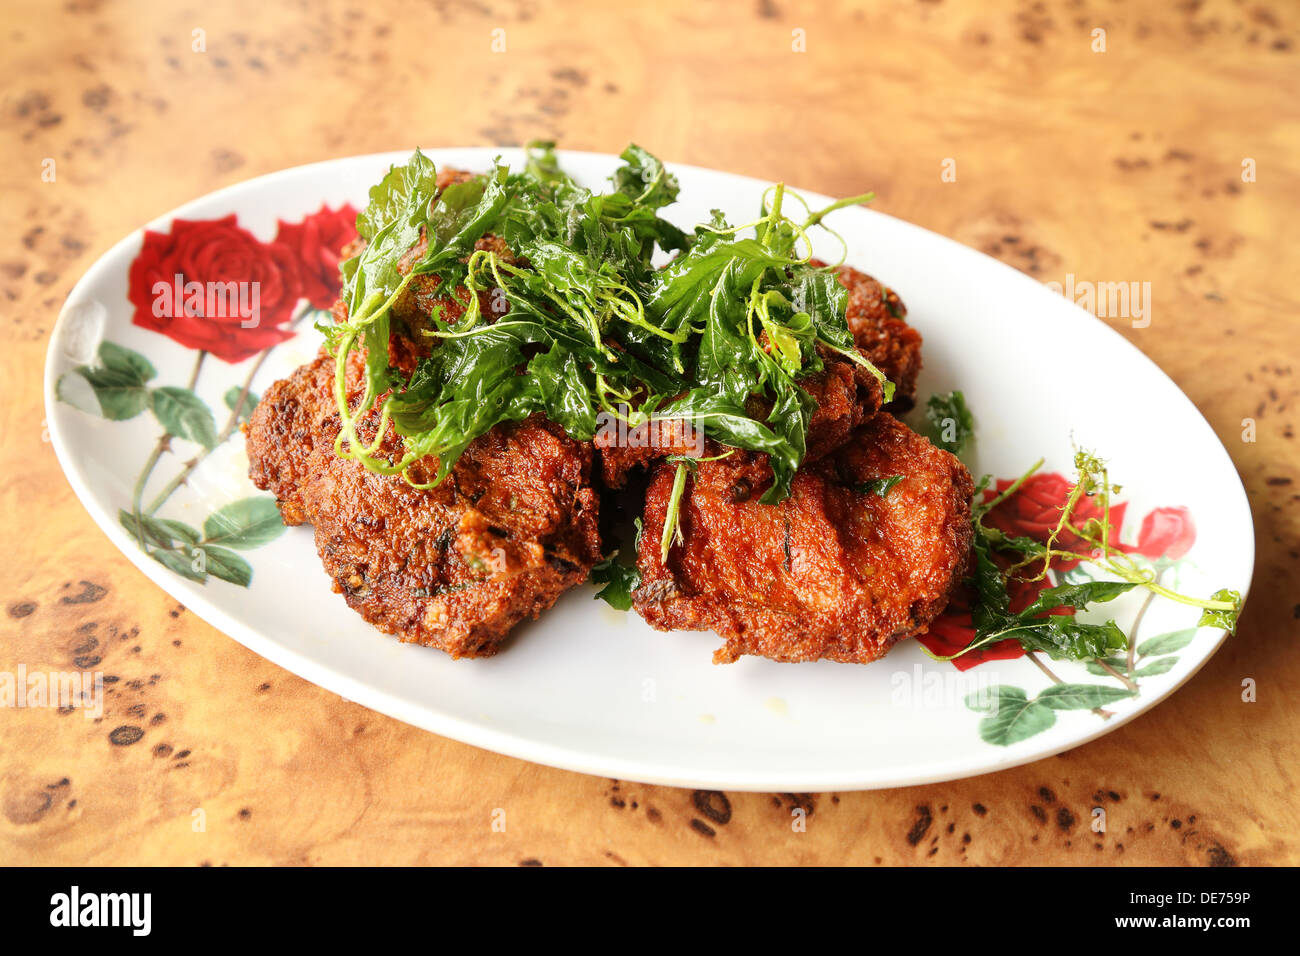 plate of Deep-fried curried fish patties Stock Photo